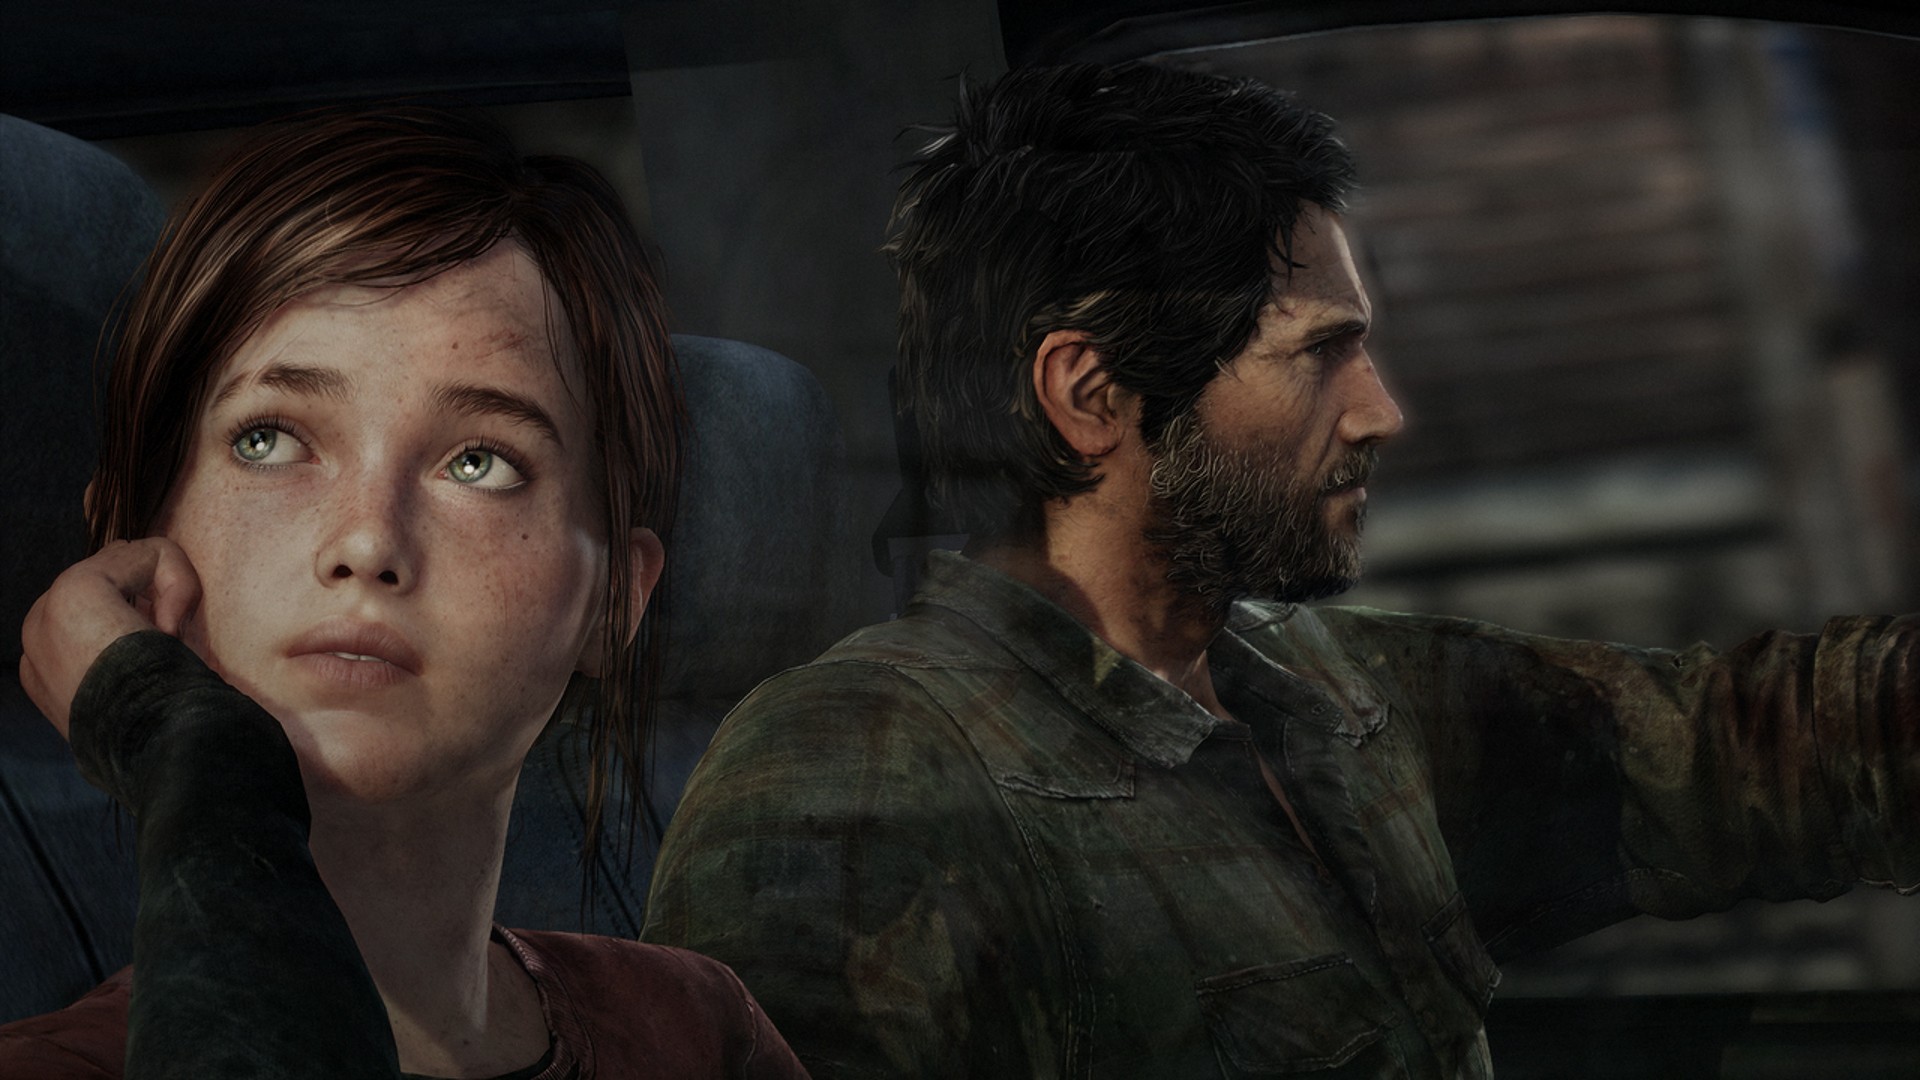 video, Games, Naughty, Dog, Playstation, 3, The, Last, Of, Us, Joel, Ellie, Sony, Computer, Entertainment Wallpaper